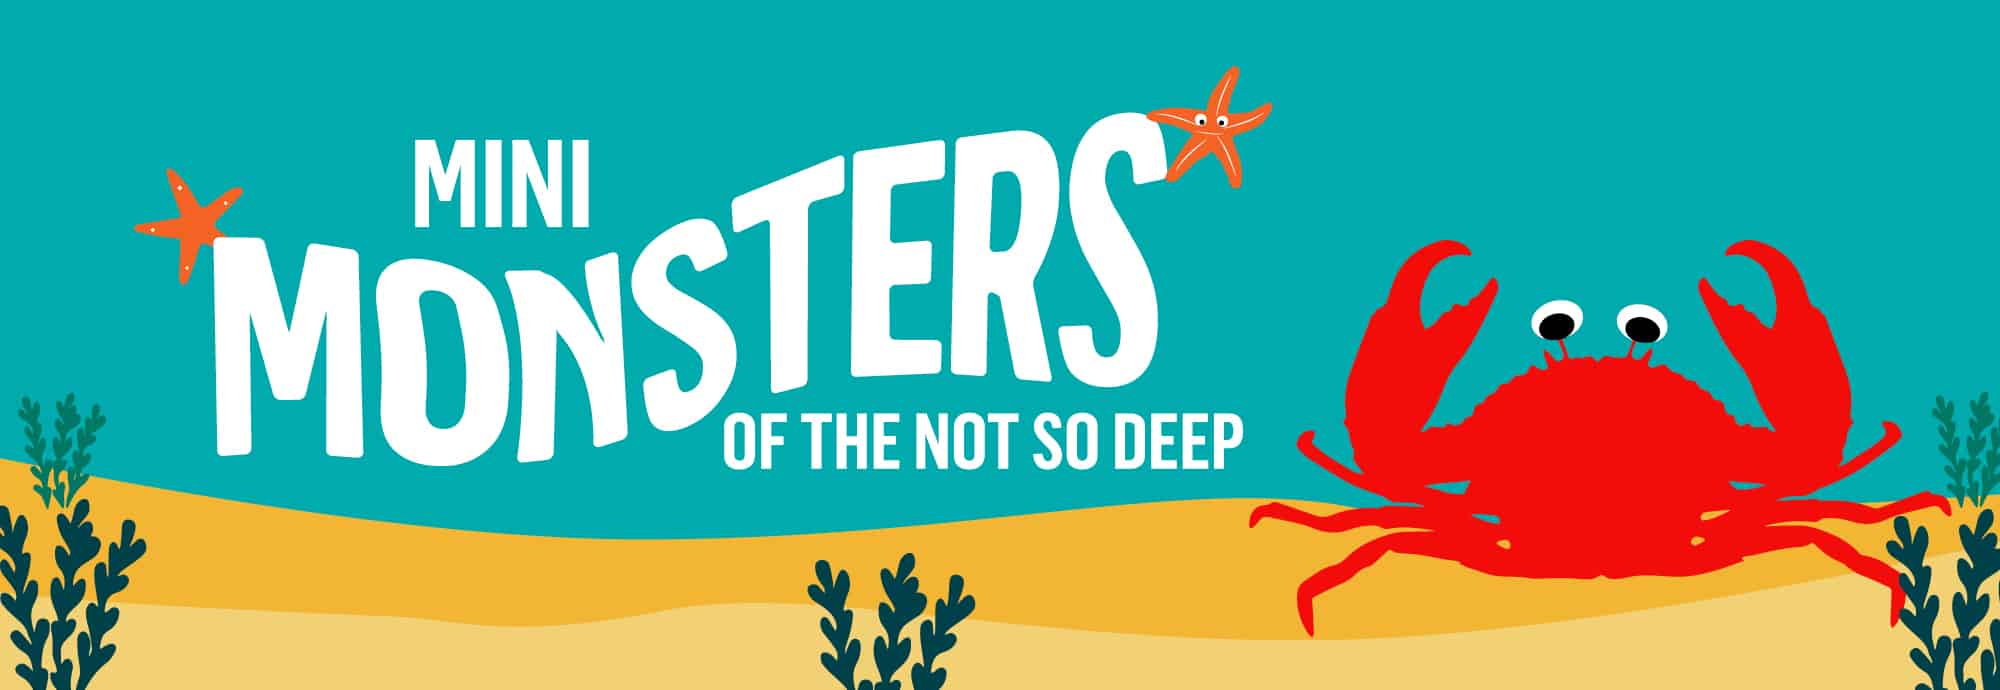 Against a blue-green background, white text reads 'Mini Monsters of the Not So Deep'. On the right is a bright red crab walking on sand.